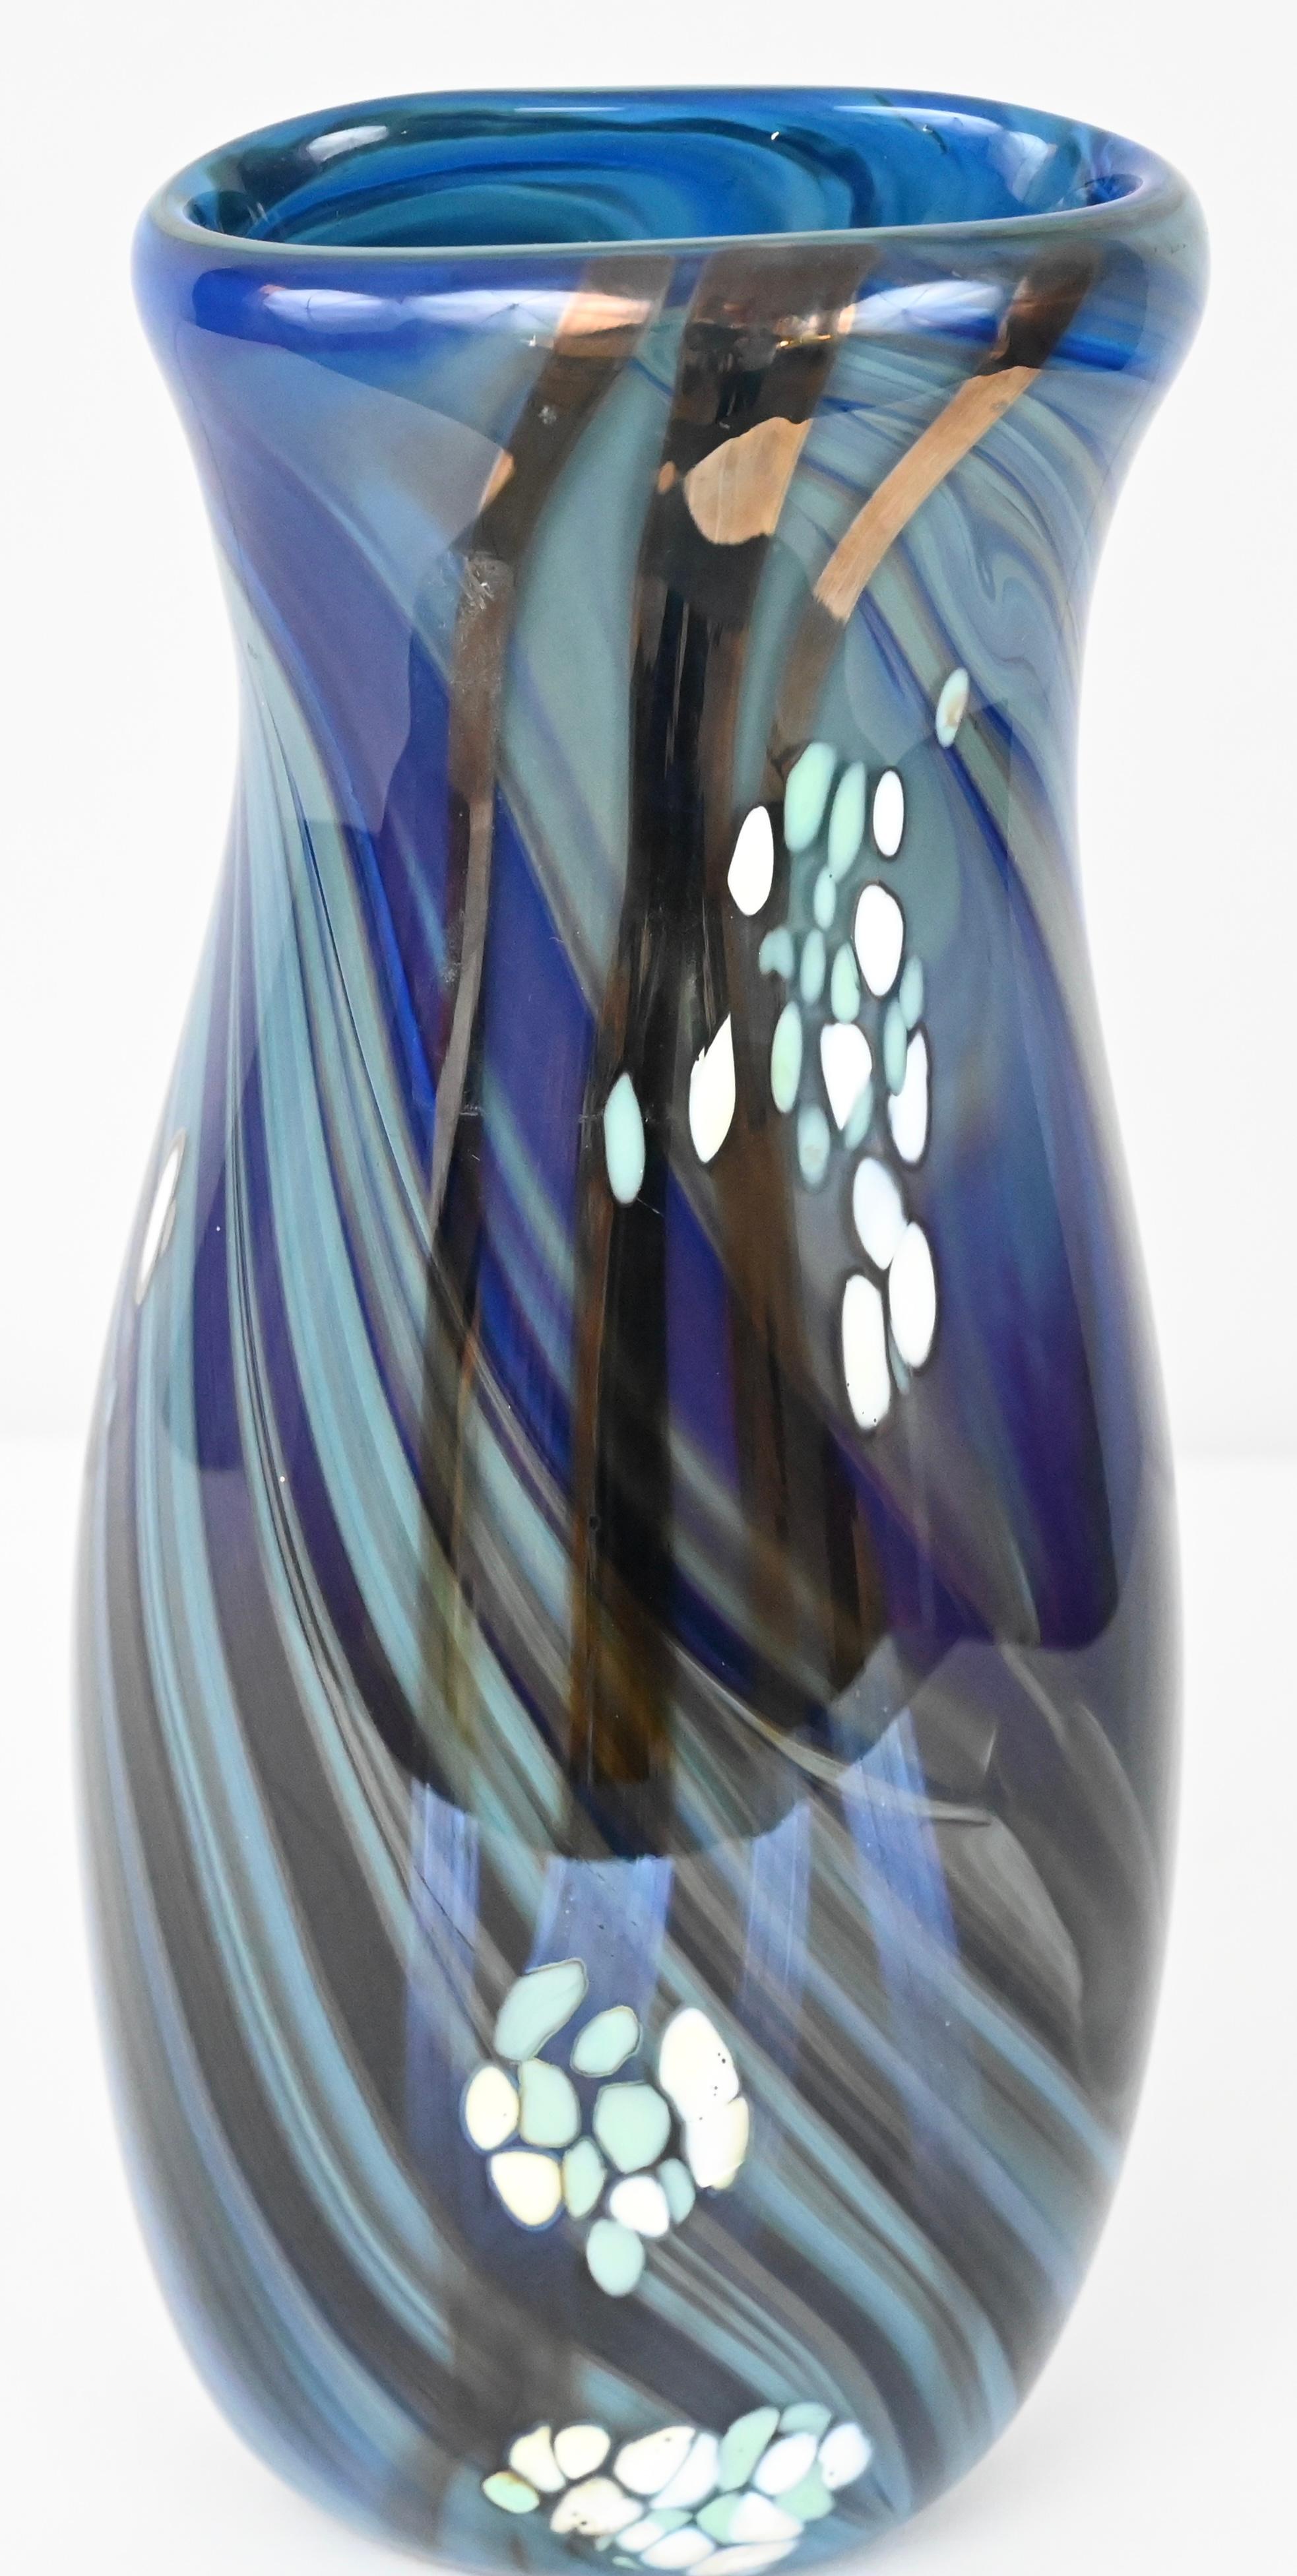 Mid-Century Art Glass Flower Vase Signed Swispot, Blue and White Art Glass Vase In Good Condition For Sale In Miami, FL